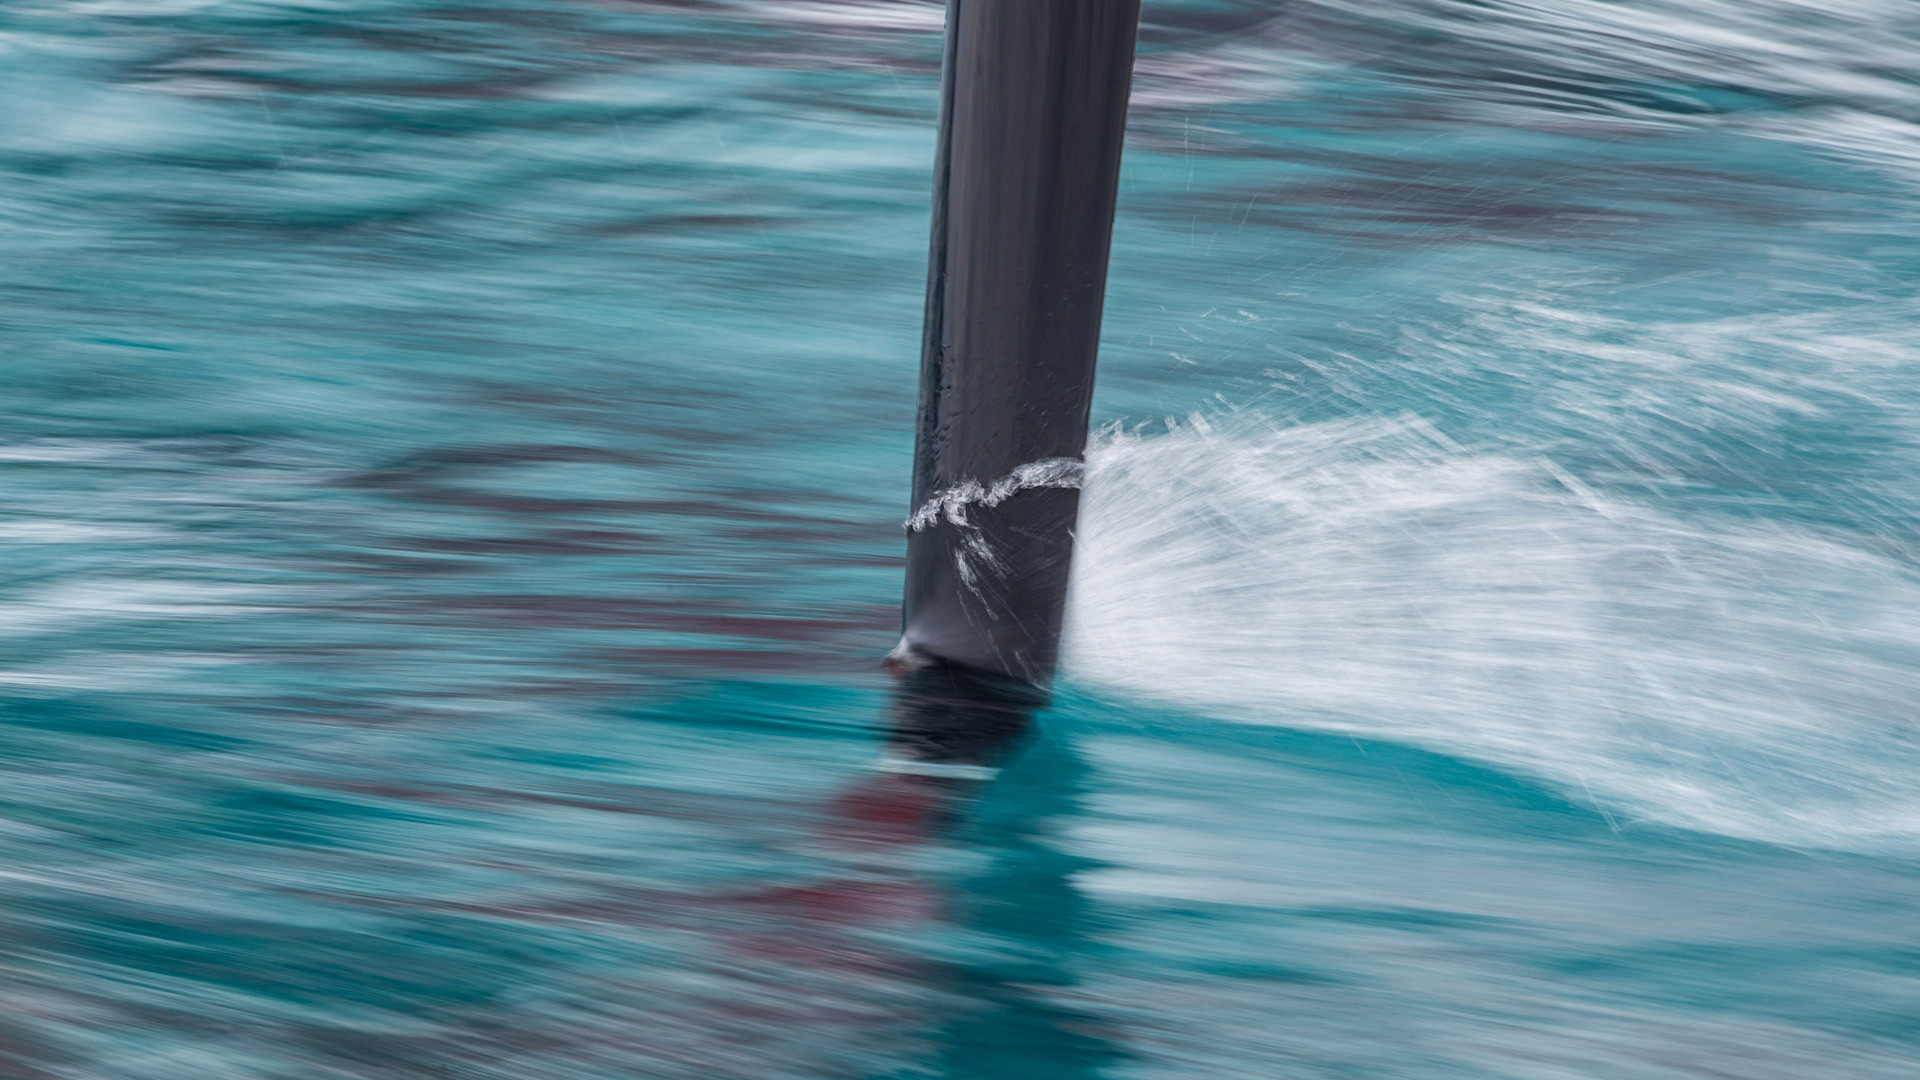 A close-up of the F50s hydrofoils cutting through the water.